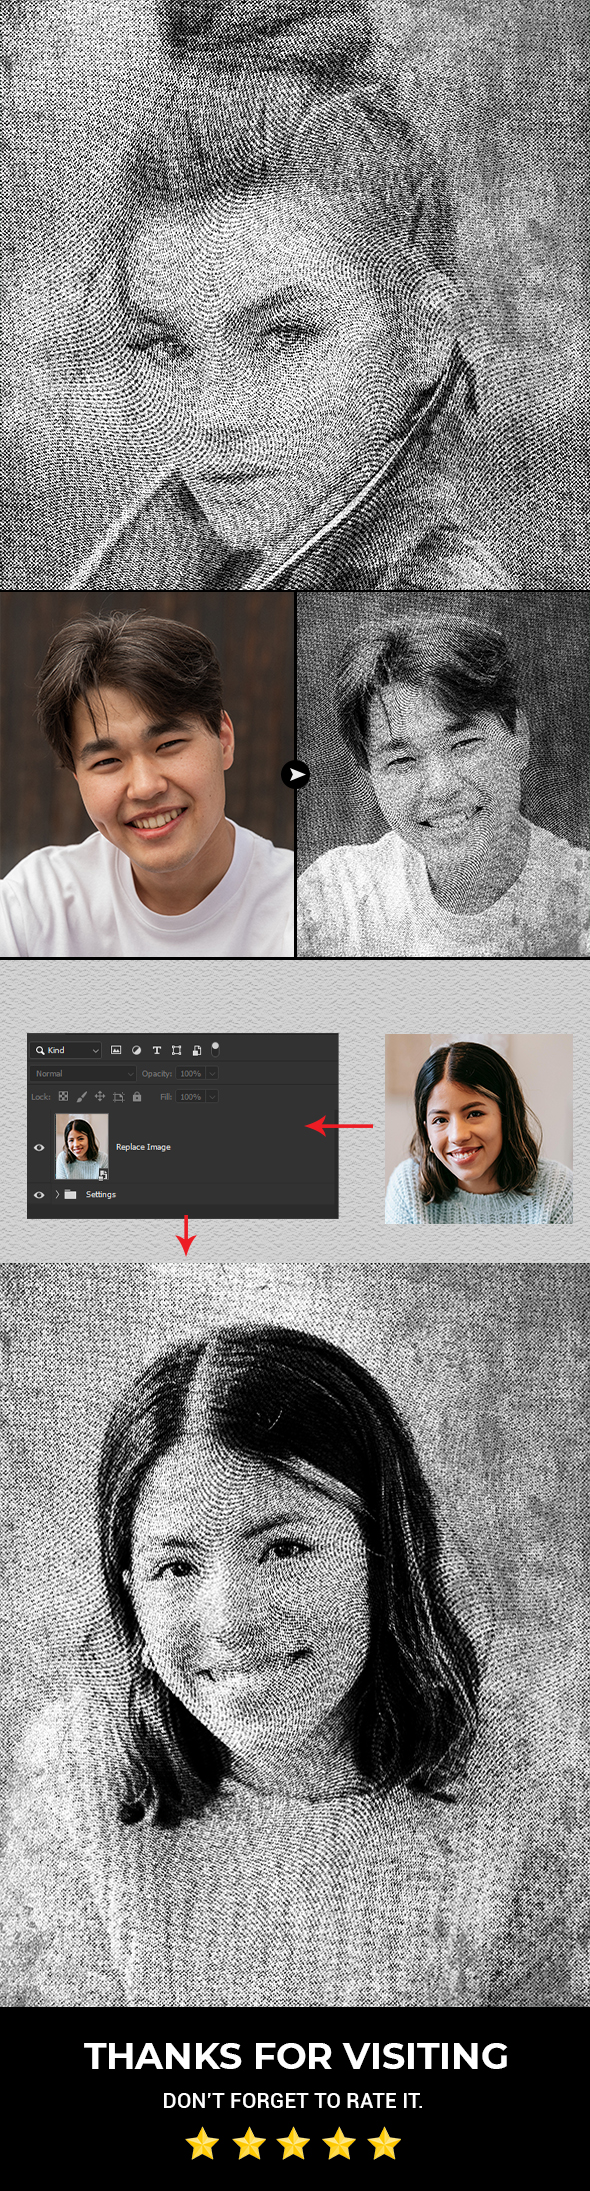 [DOWNLOAD]Old Engraved Photo Effect